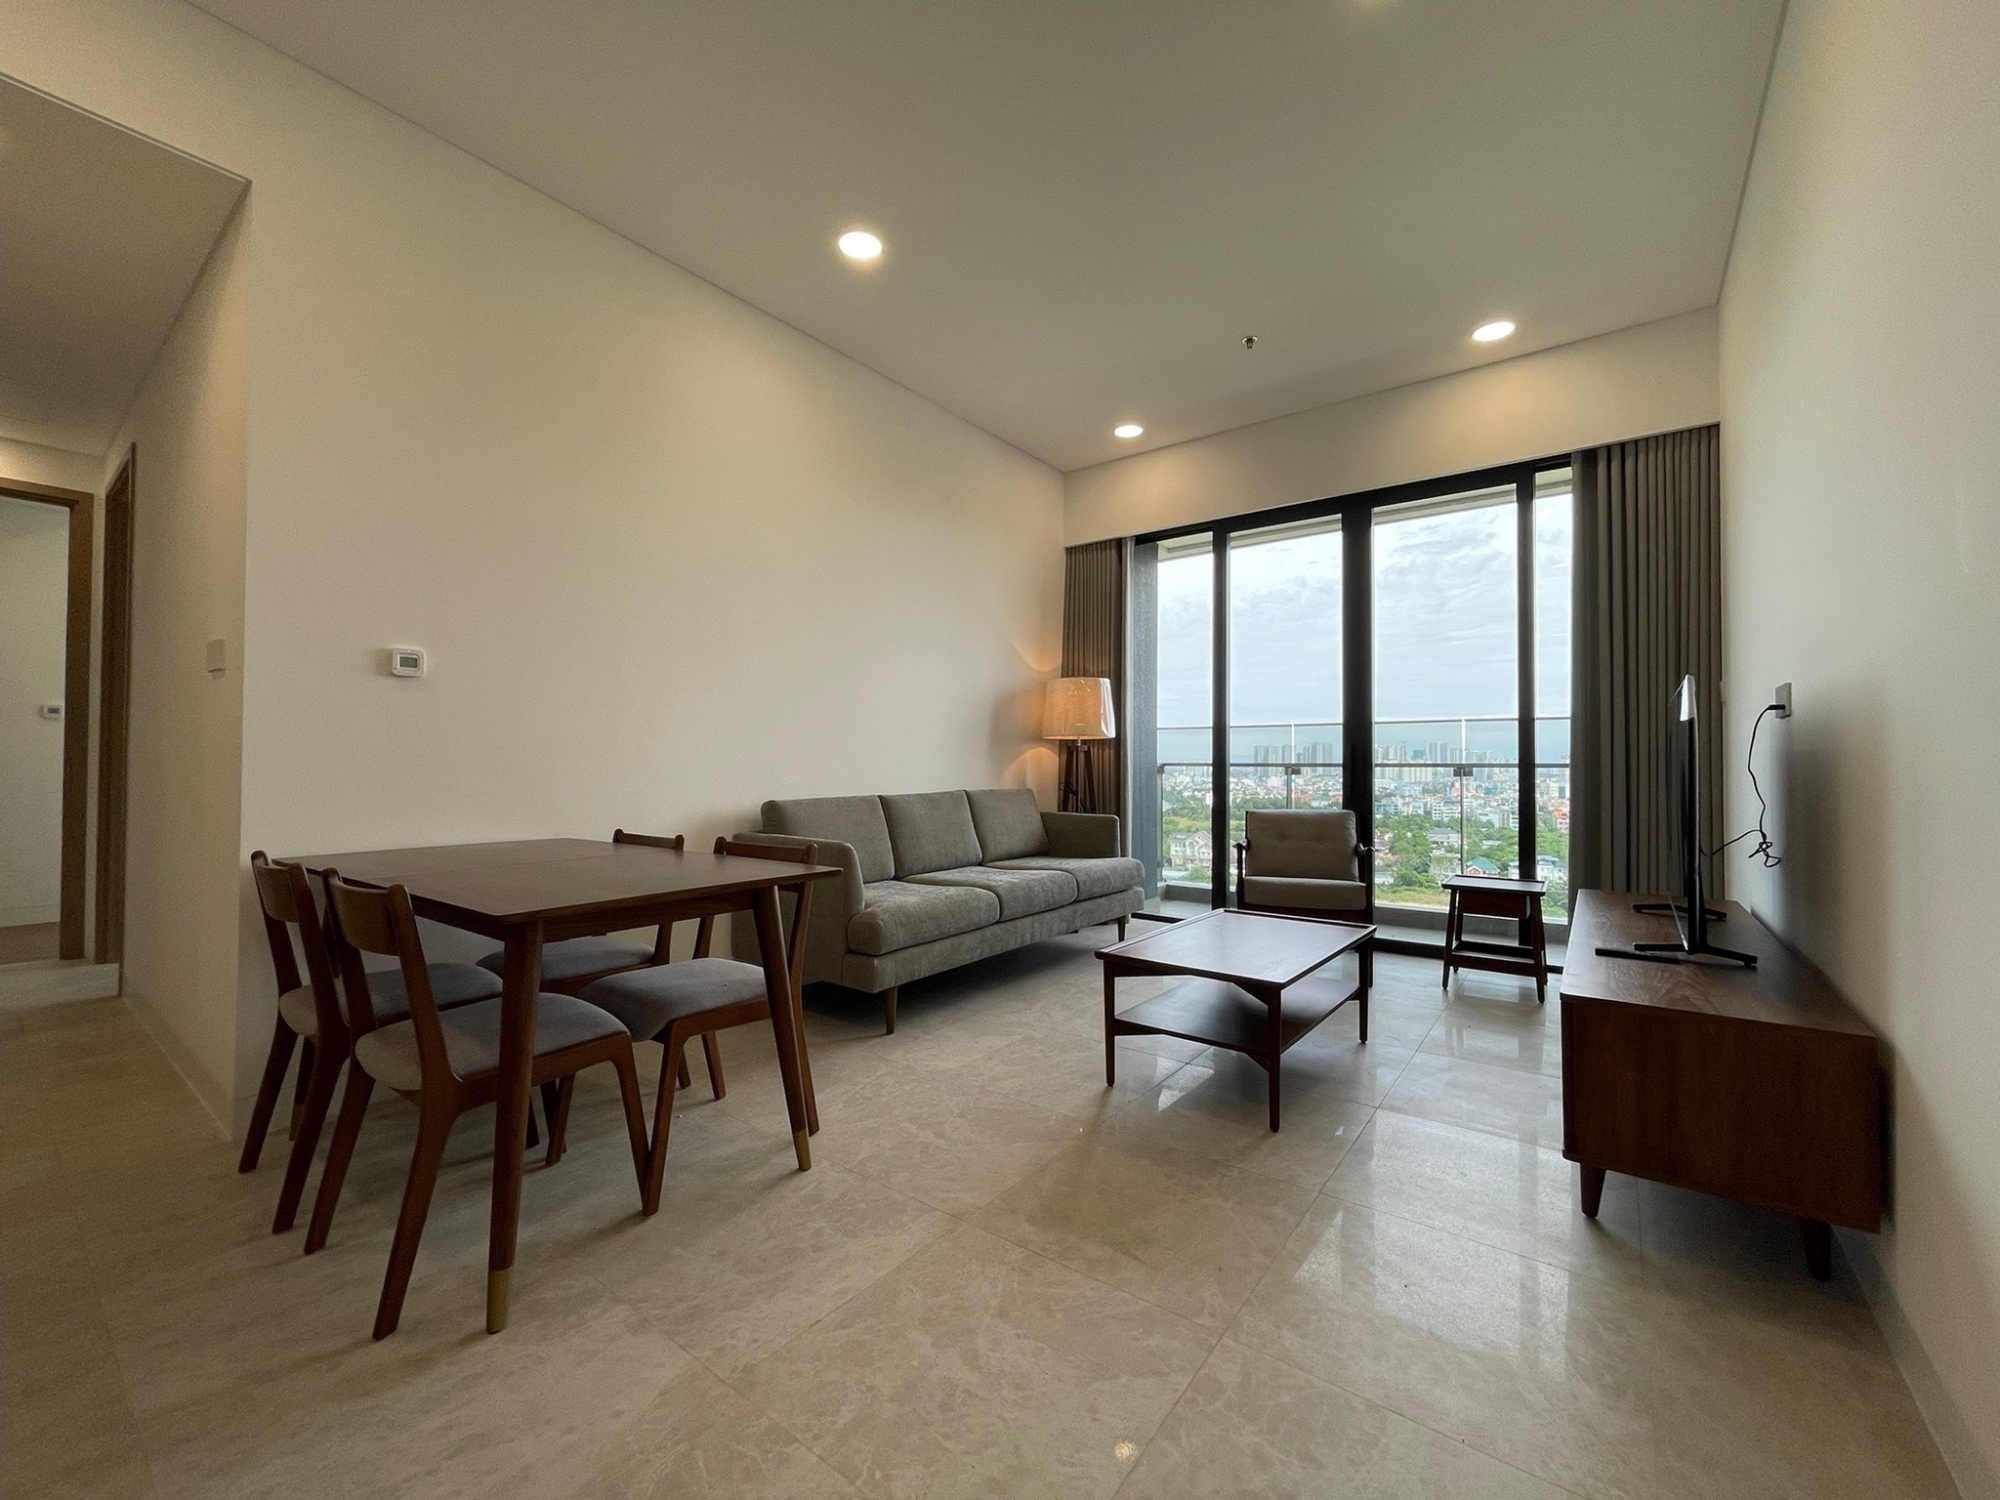 The River Thu Thiem - Hudson apartment for rent with 2 bedrooms, fully furnished